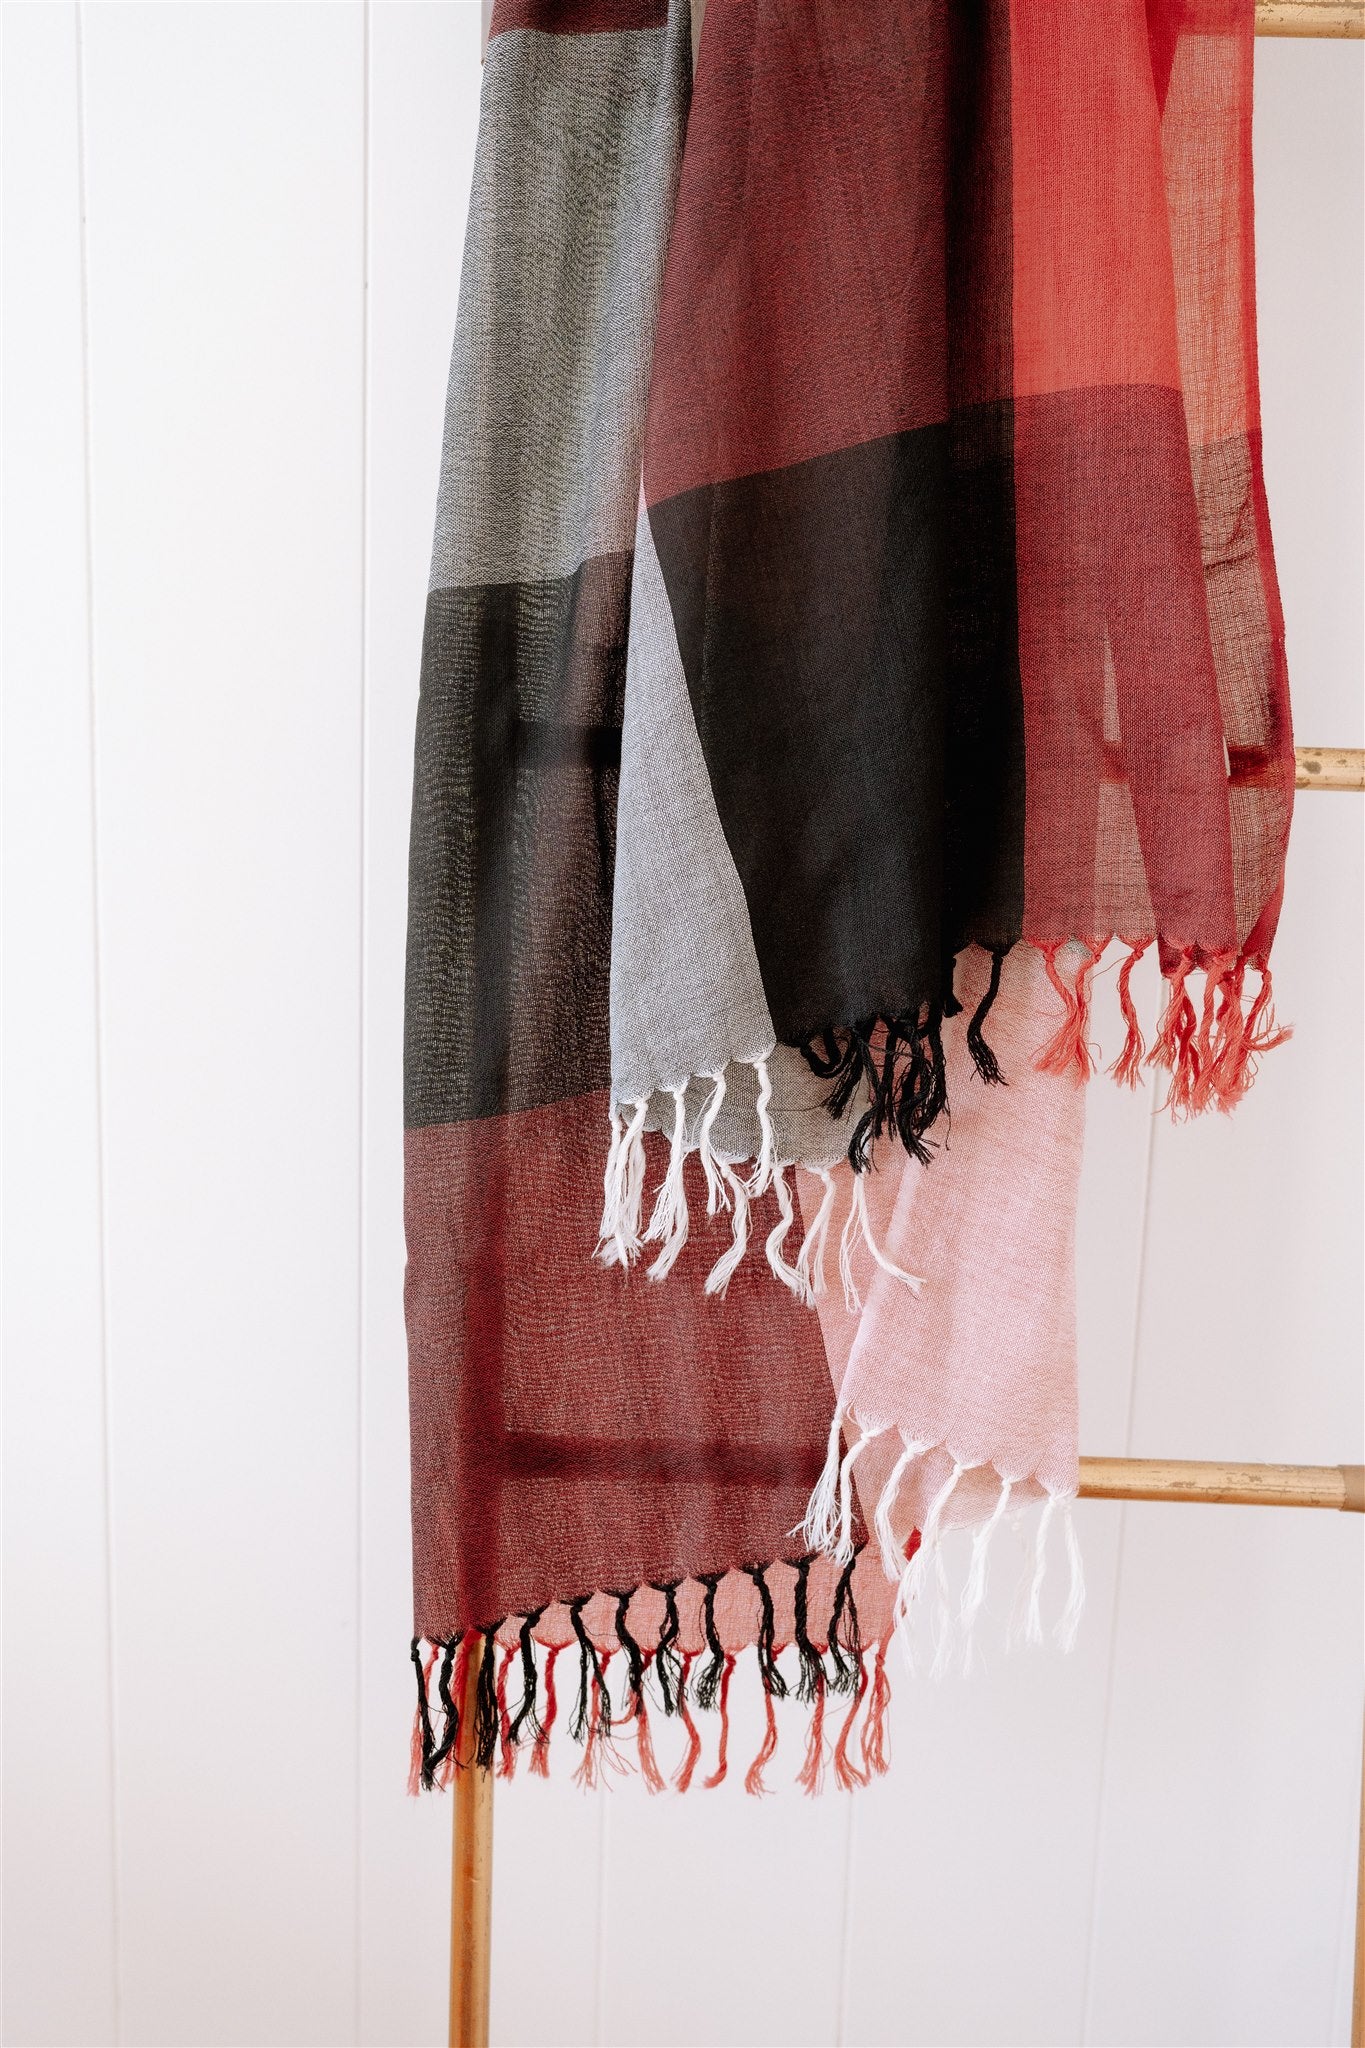 Fine Wool Scarf in Red and Charcoal